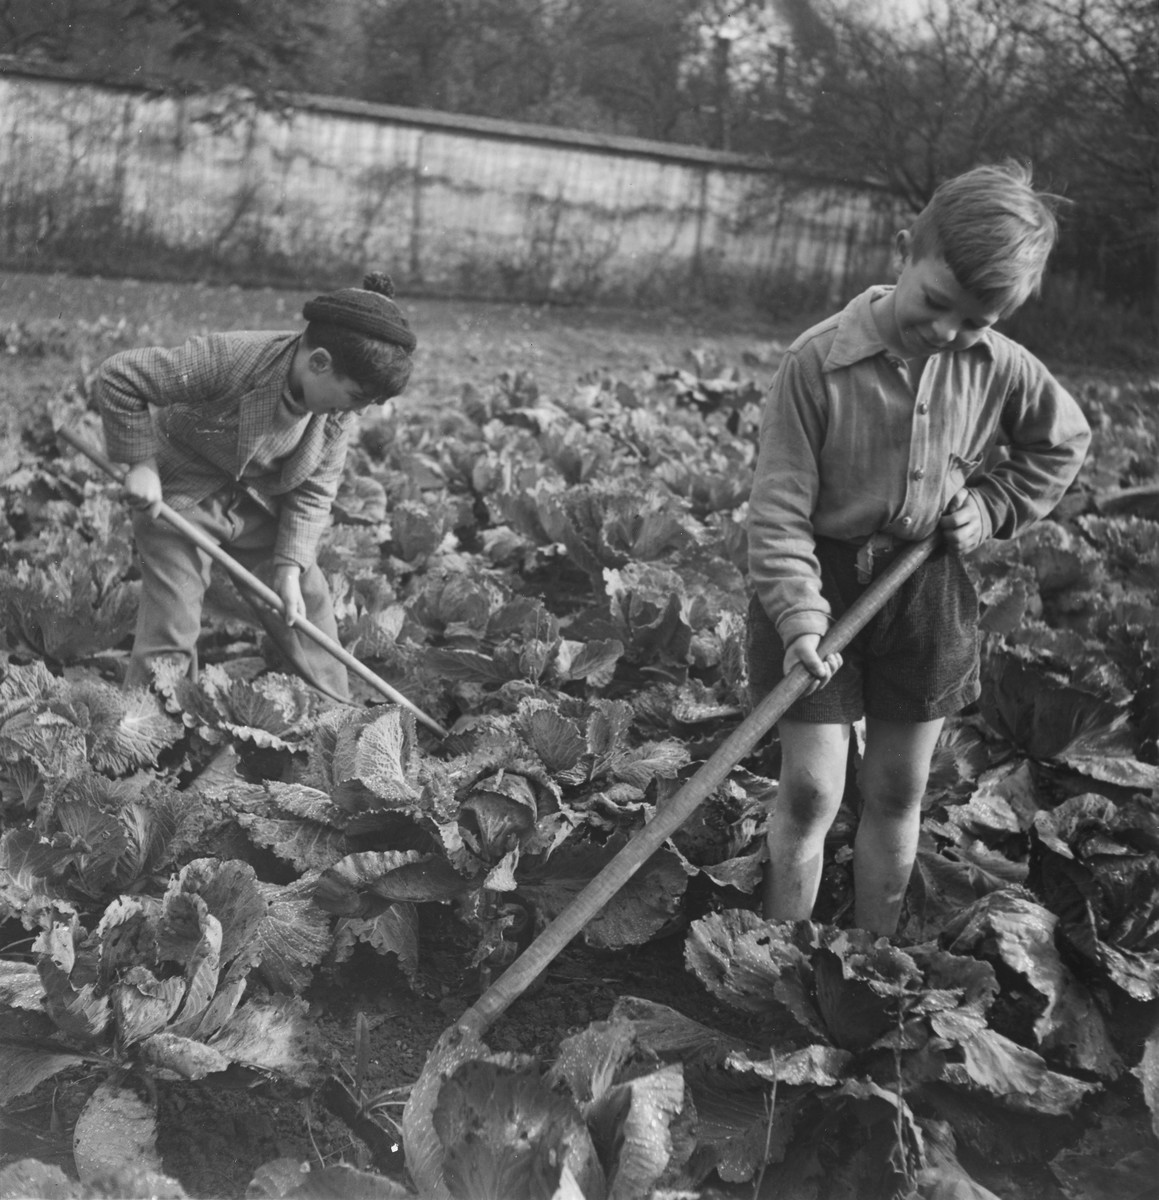 Children work in the garden of a post-war OSE home, possibly La Forge in Fontenay-aux-Roses.